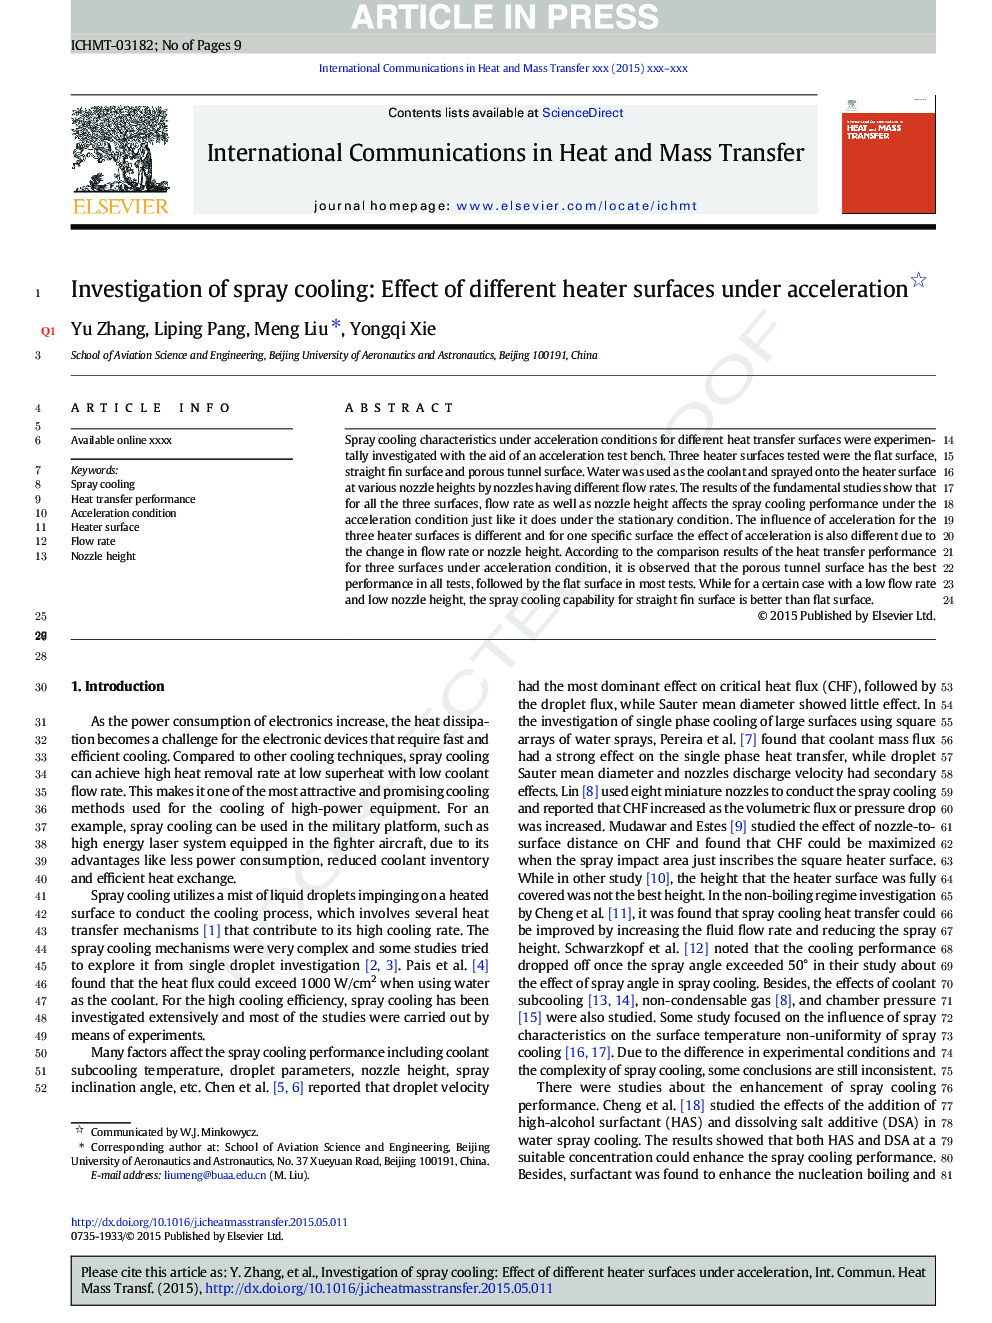 Investigation of spray cooling: Effect of different heater surfaces under acceleration